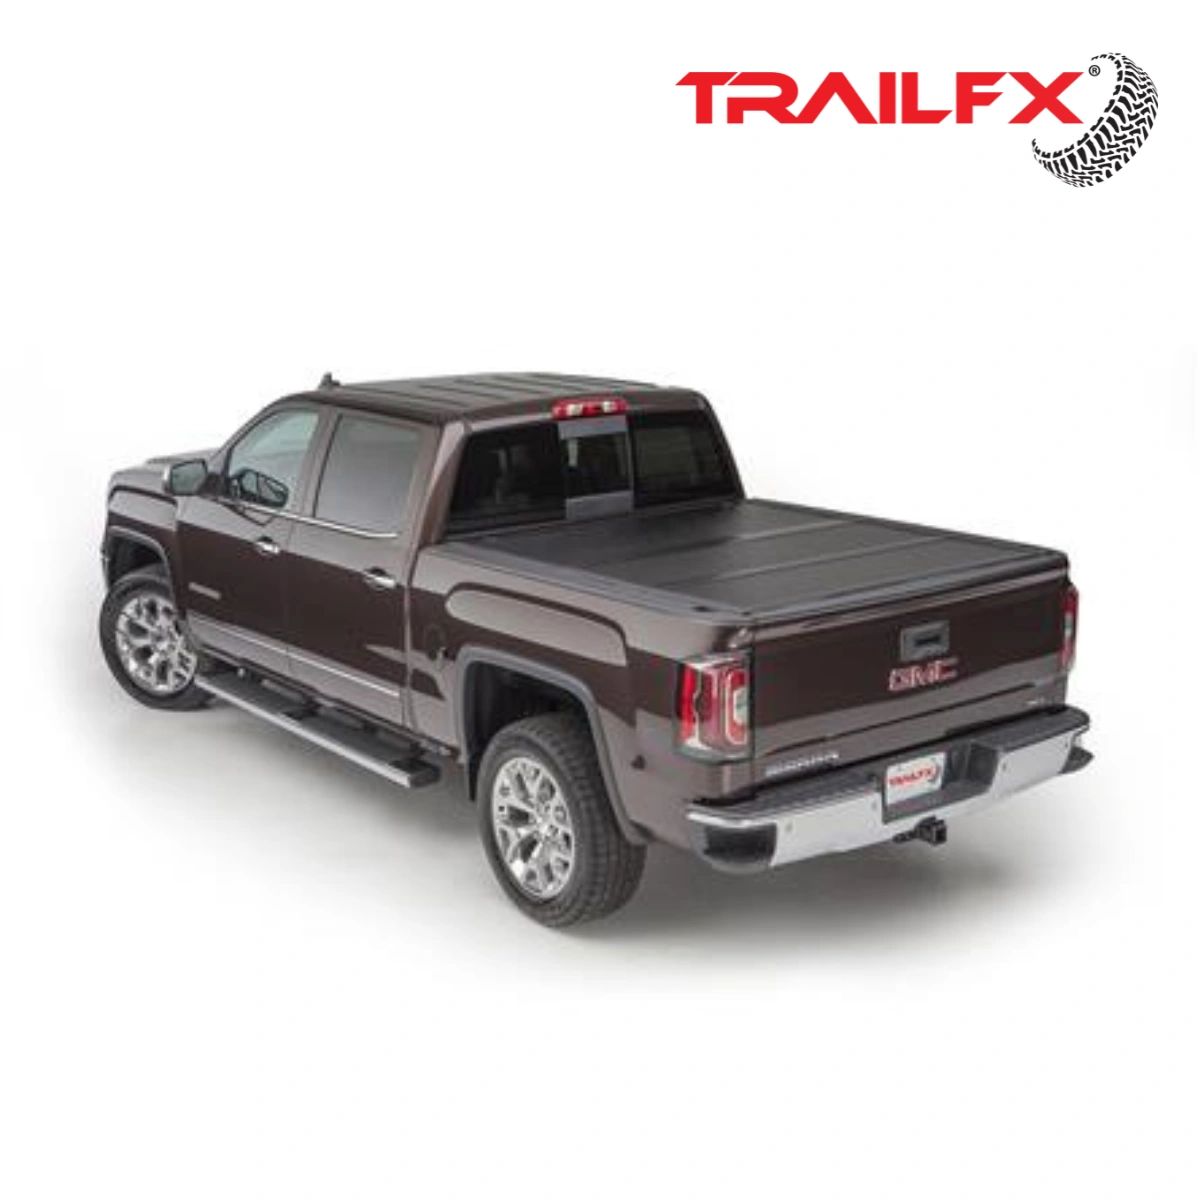 Secure your truck bed cargo with TrailFX’s Hard Trifold Tonneau Cover.

Stop in and protect your truck bed with TrailFX’s Hard Trifold Tonneau Cover.